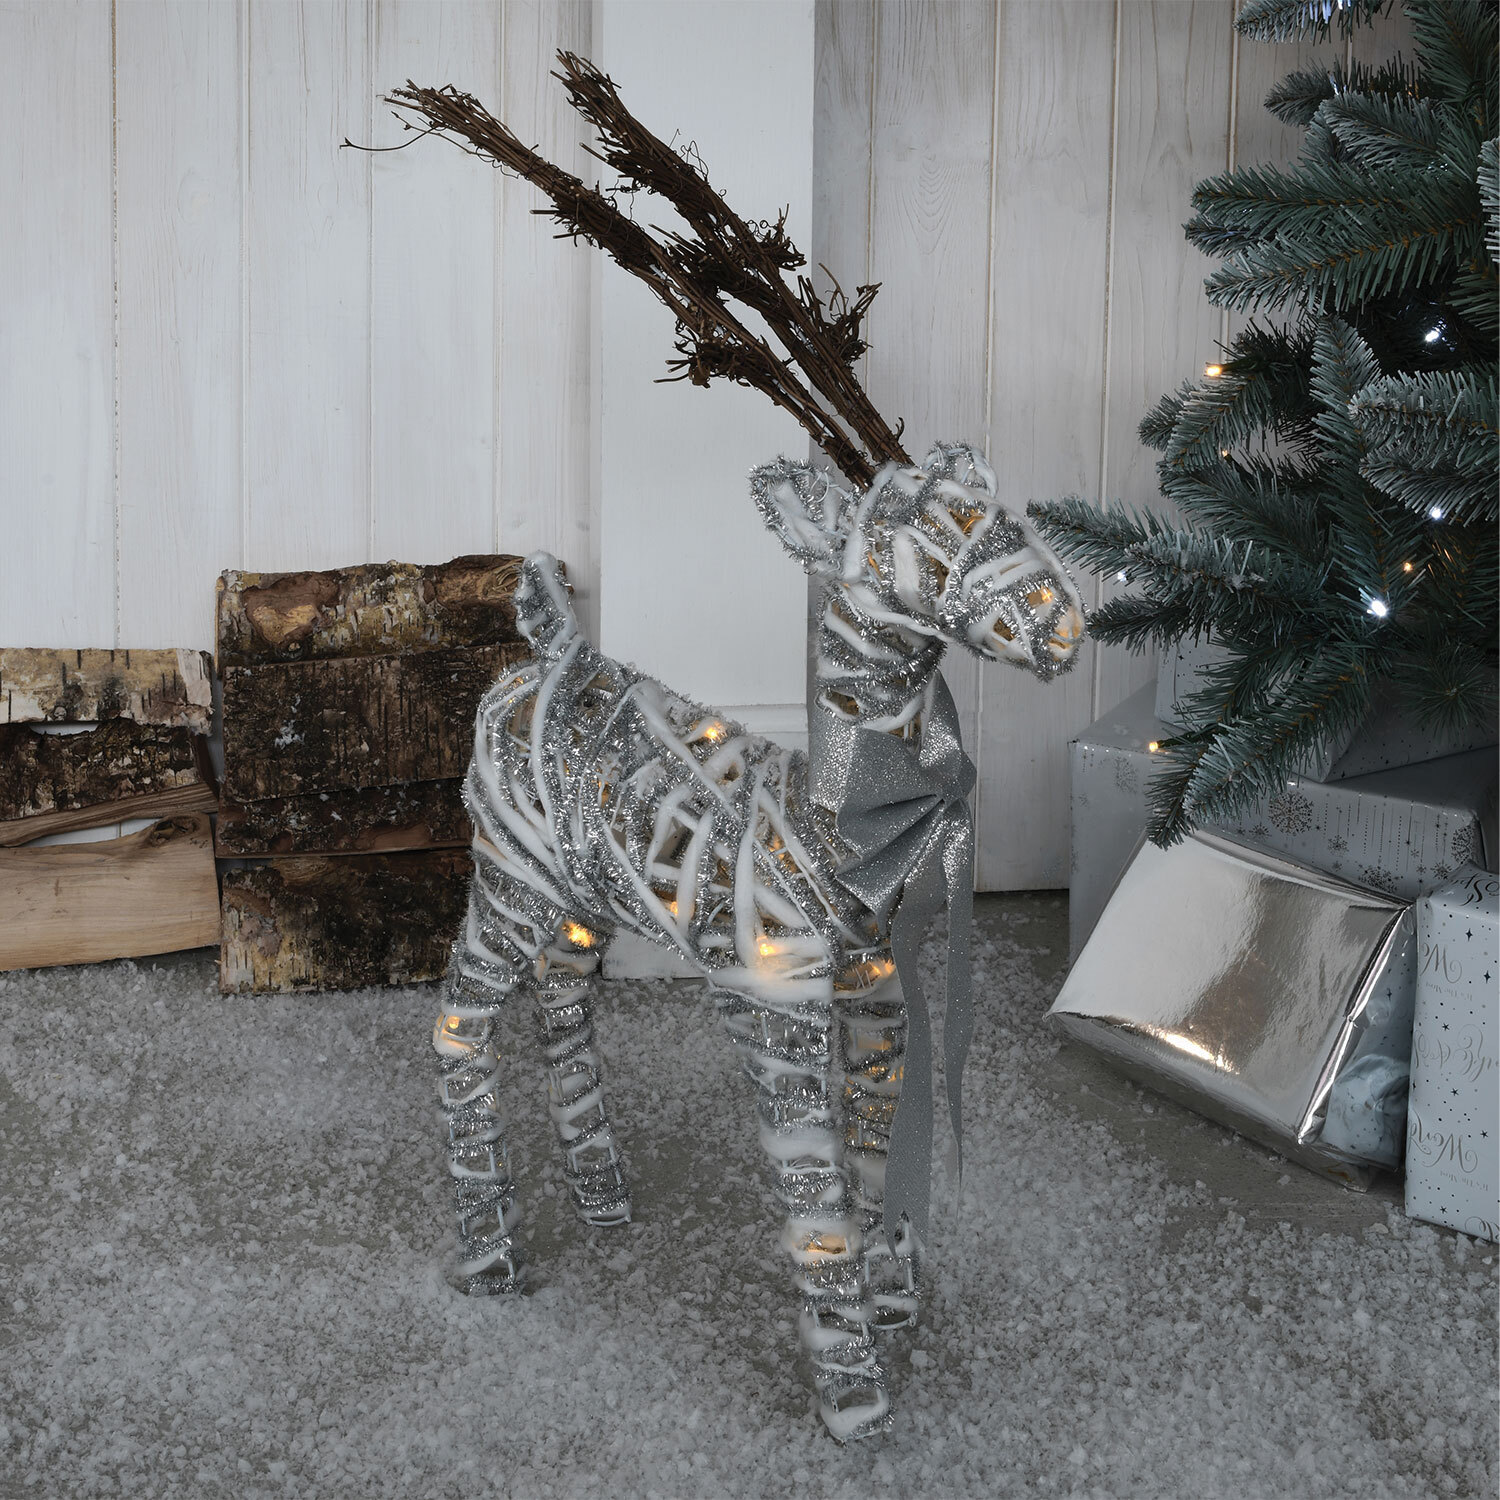 Platinum Eternity Silver and White LED Cotton Reindeer Decoration Image 2